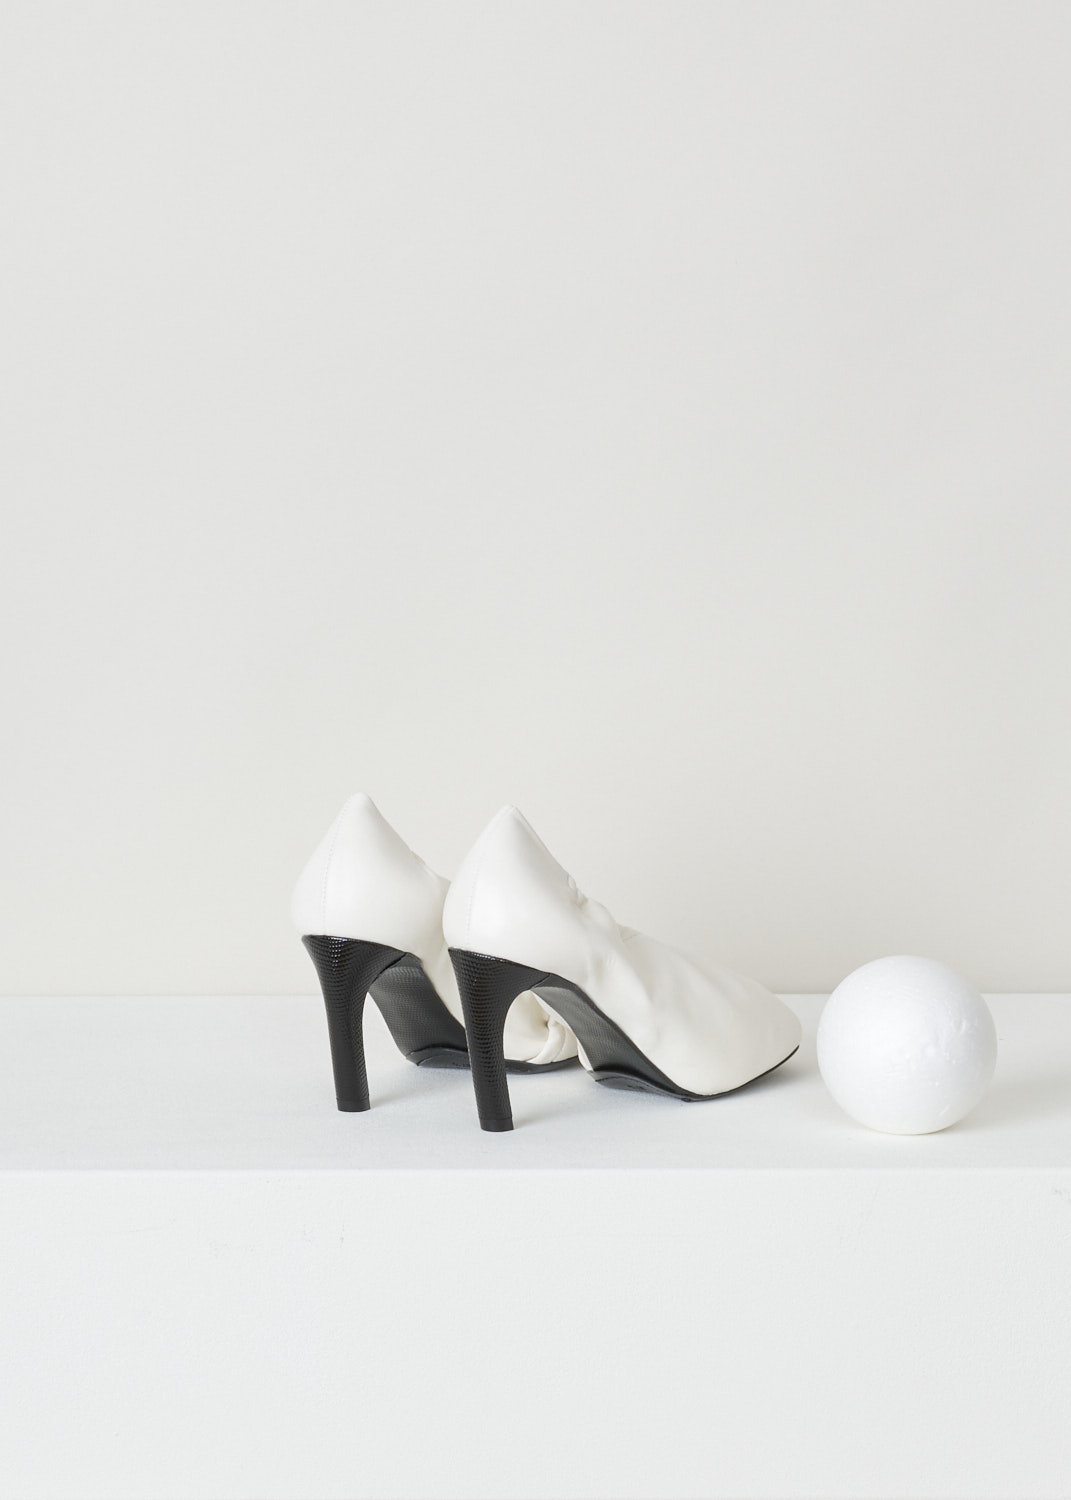 Dries van Noten, Off-white pump with an elastic fold-over vamp, WS211_138_H80_QU155_white001, back, white black, Off-white pumps made entirely out of soft and smooth calfskin. A quirky feature on this model is the elastic topline which folds over the toe vamp, ensuring a unique design feature. The toe vamp comes in a square format. Another lovely feature on this model is the heel which is cover in black embossed leather. 

Heel height: 7.5 cm / 2.95 inch.